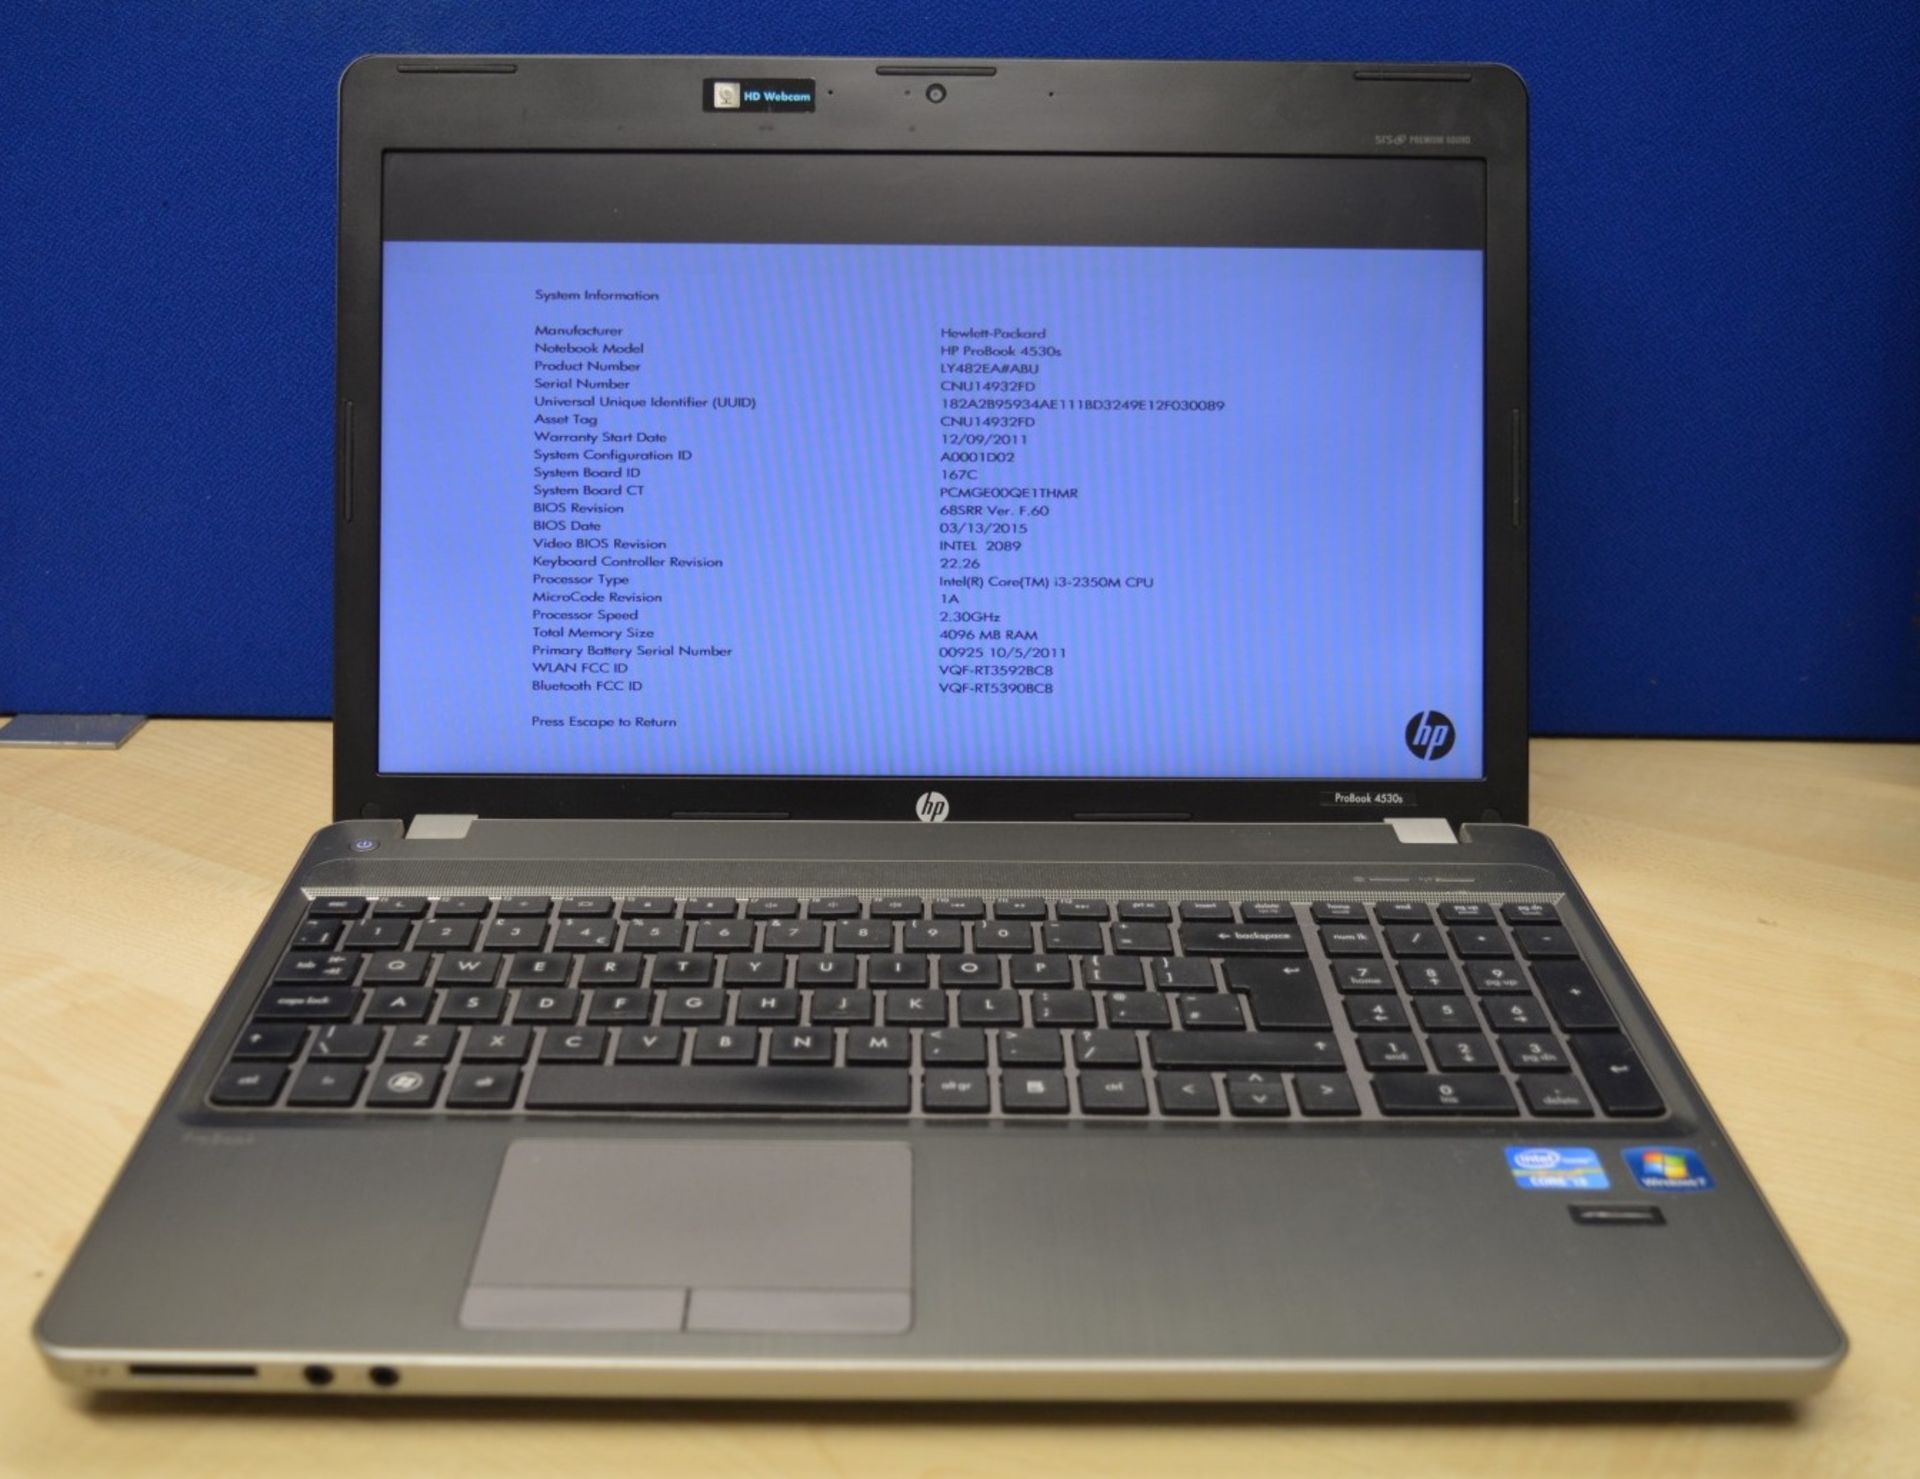 1 x HP Probook 4530s Laptop Computer - 15.6 Inch Screen Size - Features Intel Core i3-2350M Dual